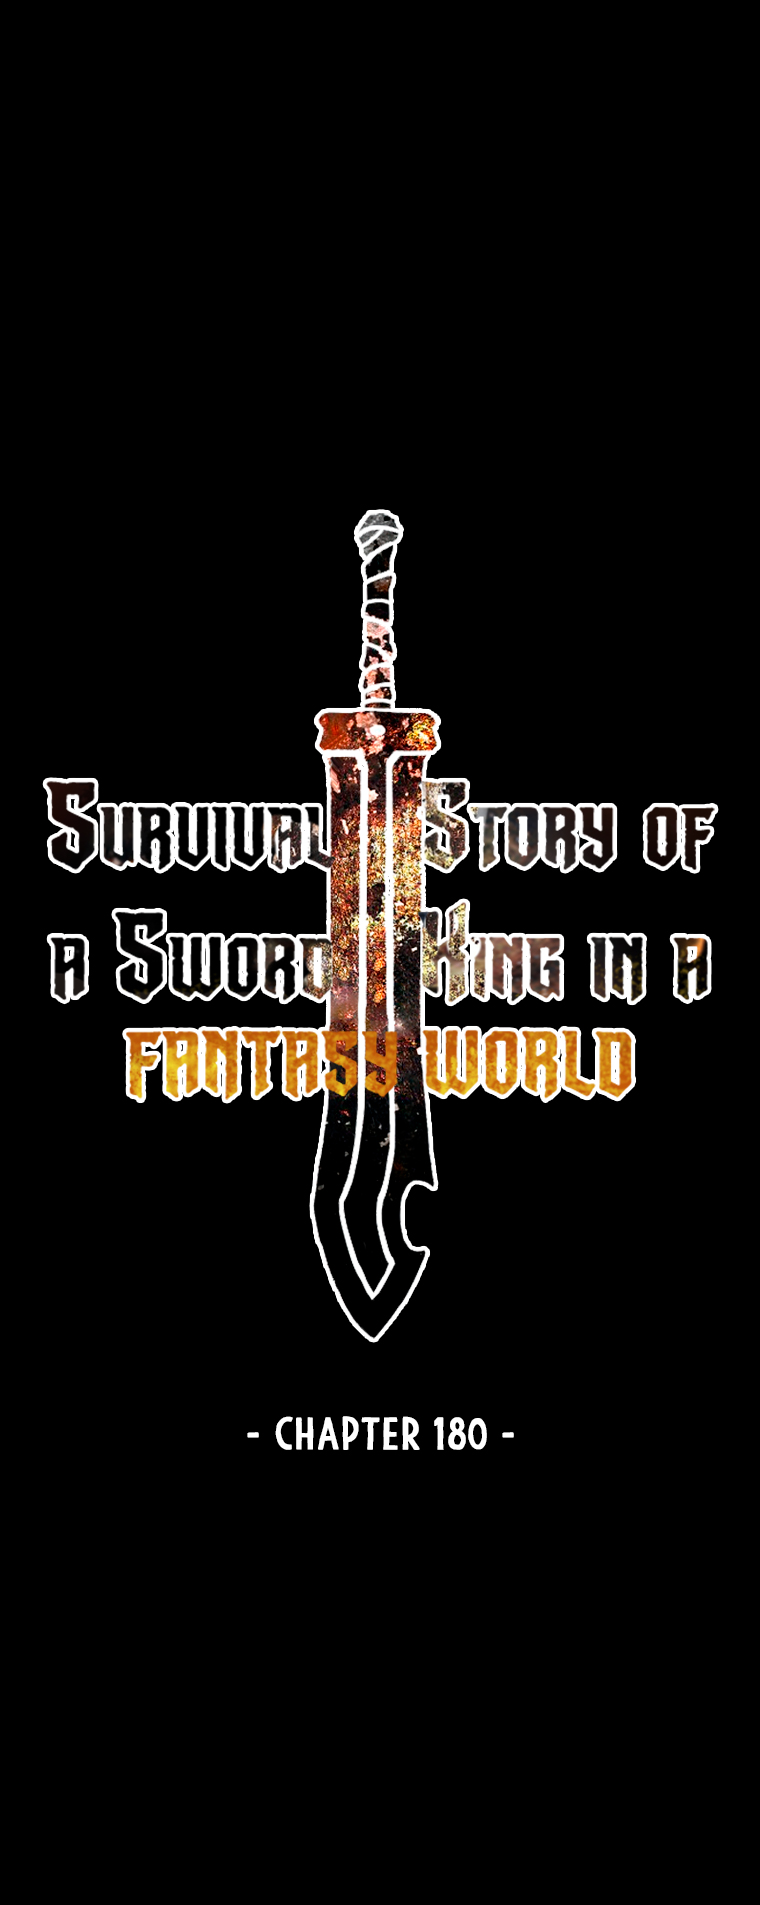 Survival Story of a Sword King in a Fantasy World - Chapter 28559 - Image 1